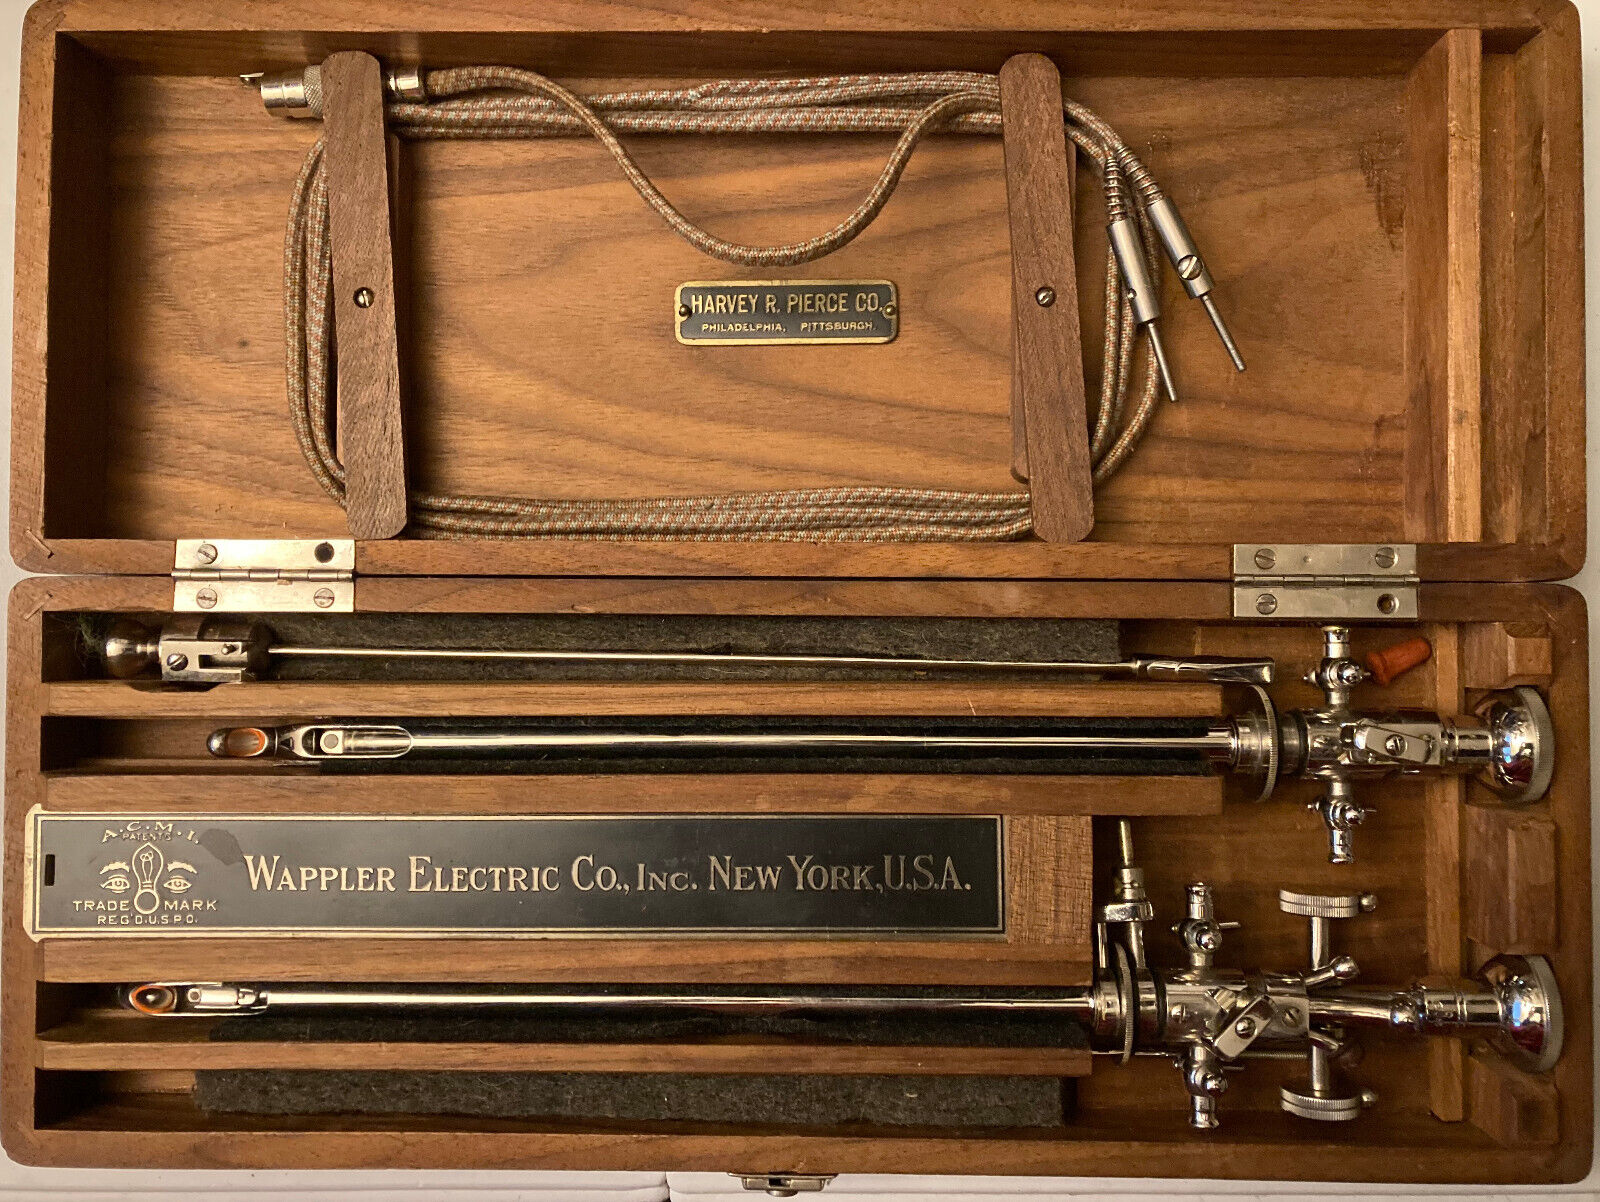 Vintage Brown-Buerger Cystoscope Original Wood Case Wappler Electric Co.New York